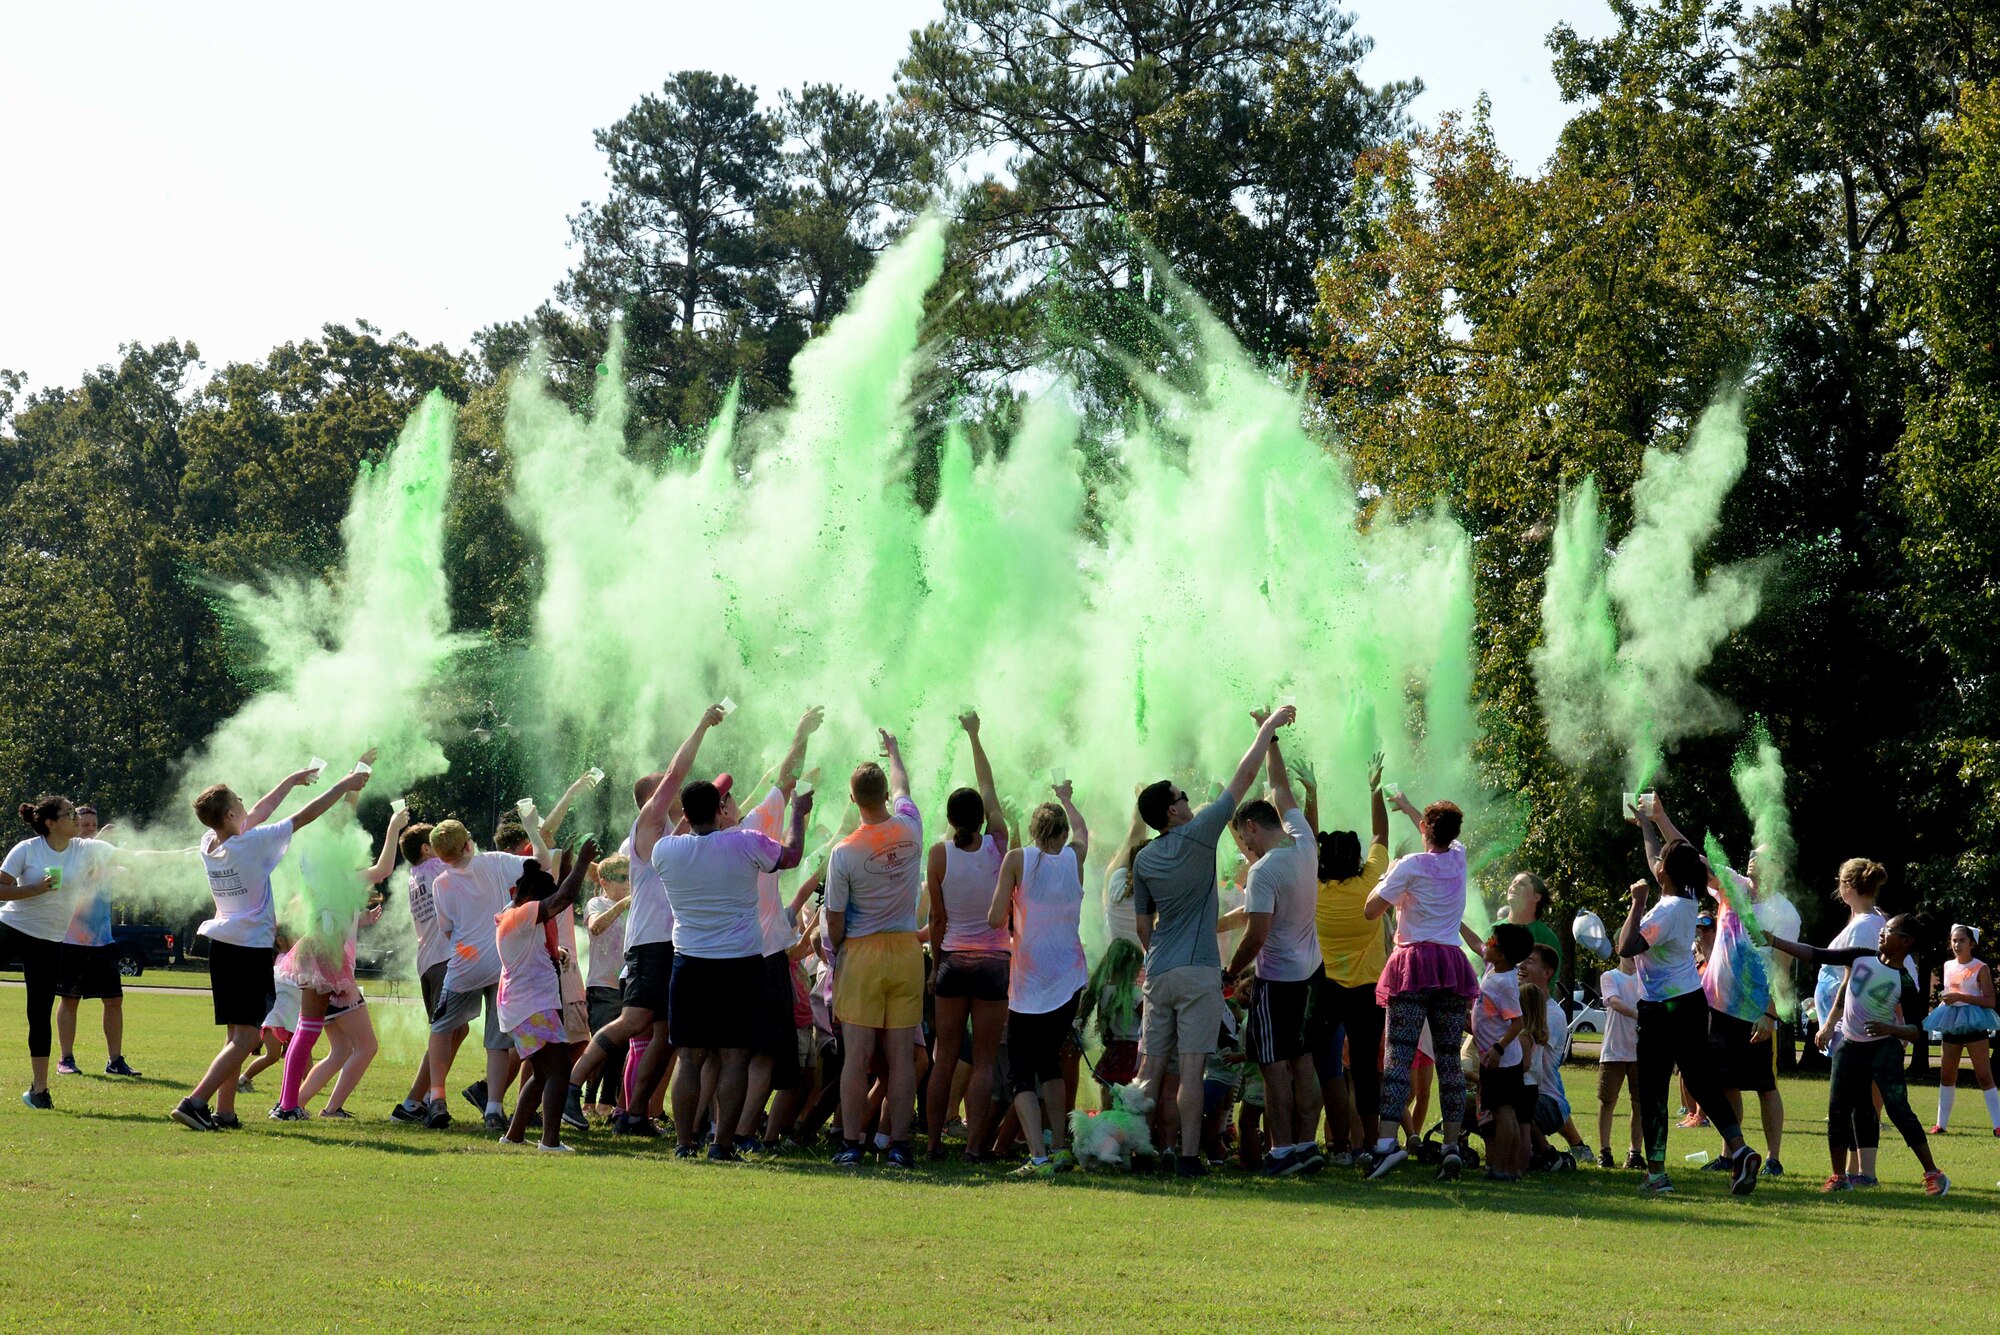 Participants begin the sixth annual Color Run Sept. 22, 2018, at Columbus Air Force Base, Mississippi. The event consisted of a 5K run or a 2-mile run that participants could choose from. (U.S. Air Force photo by Airman Hannah Bean)